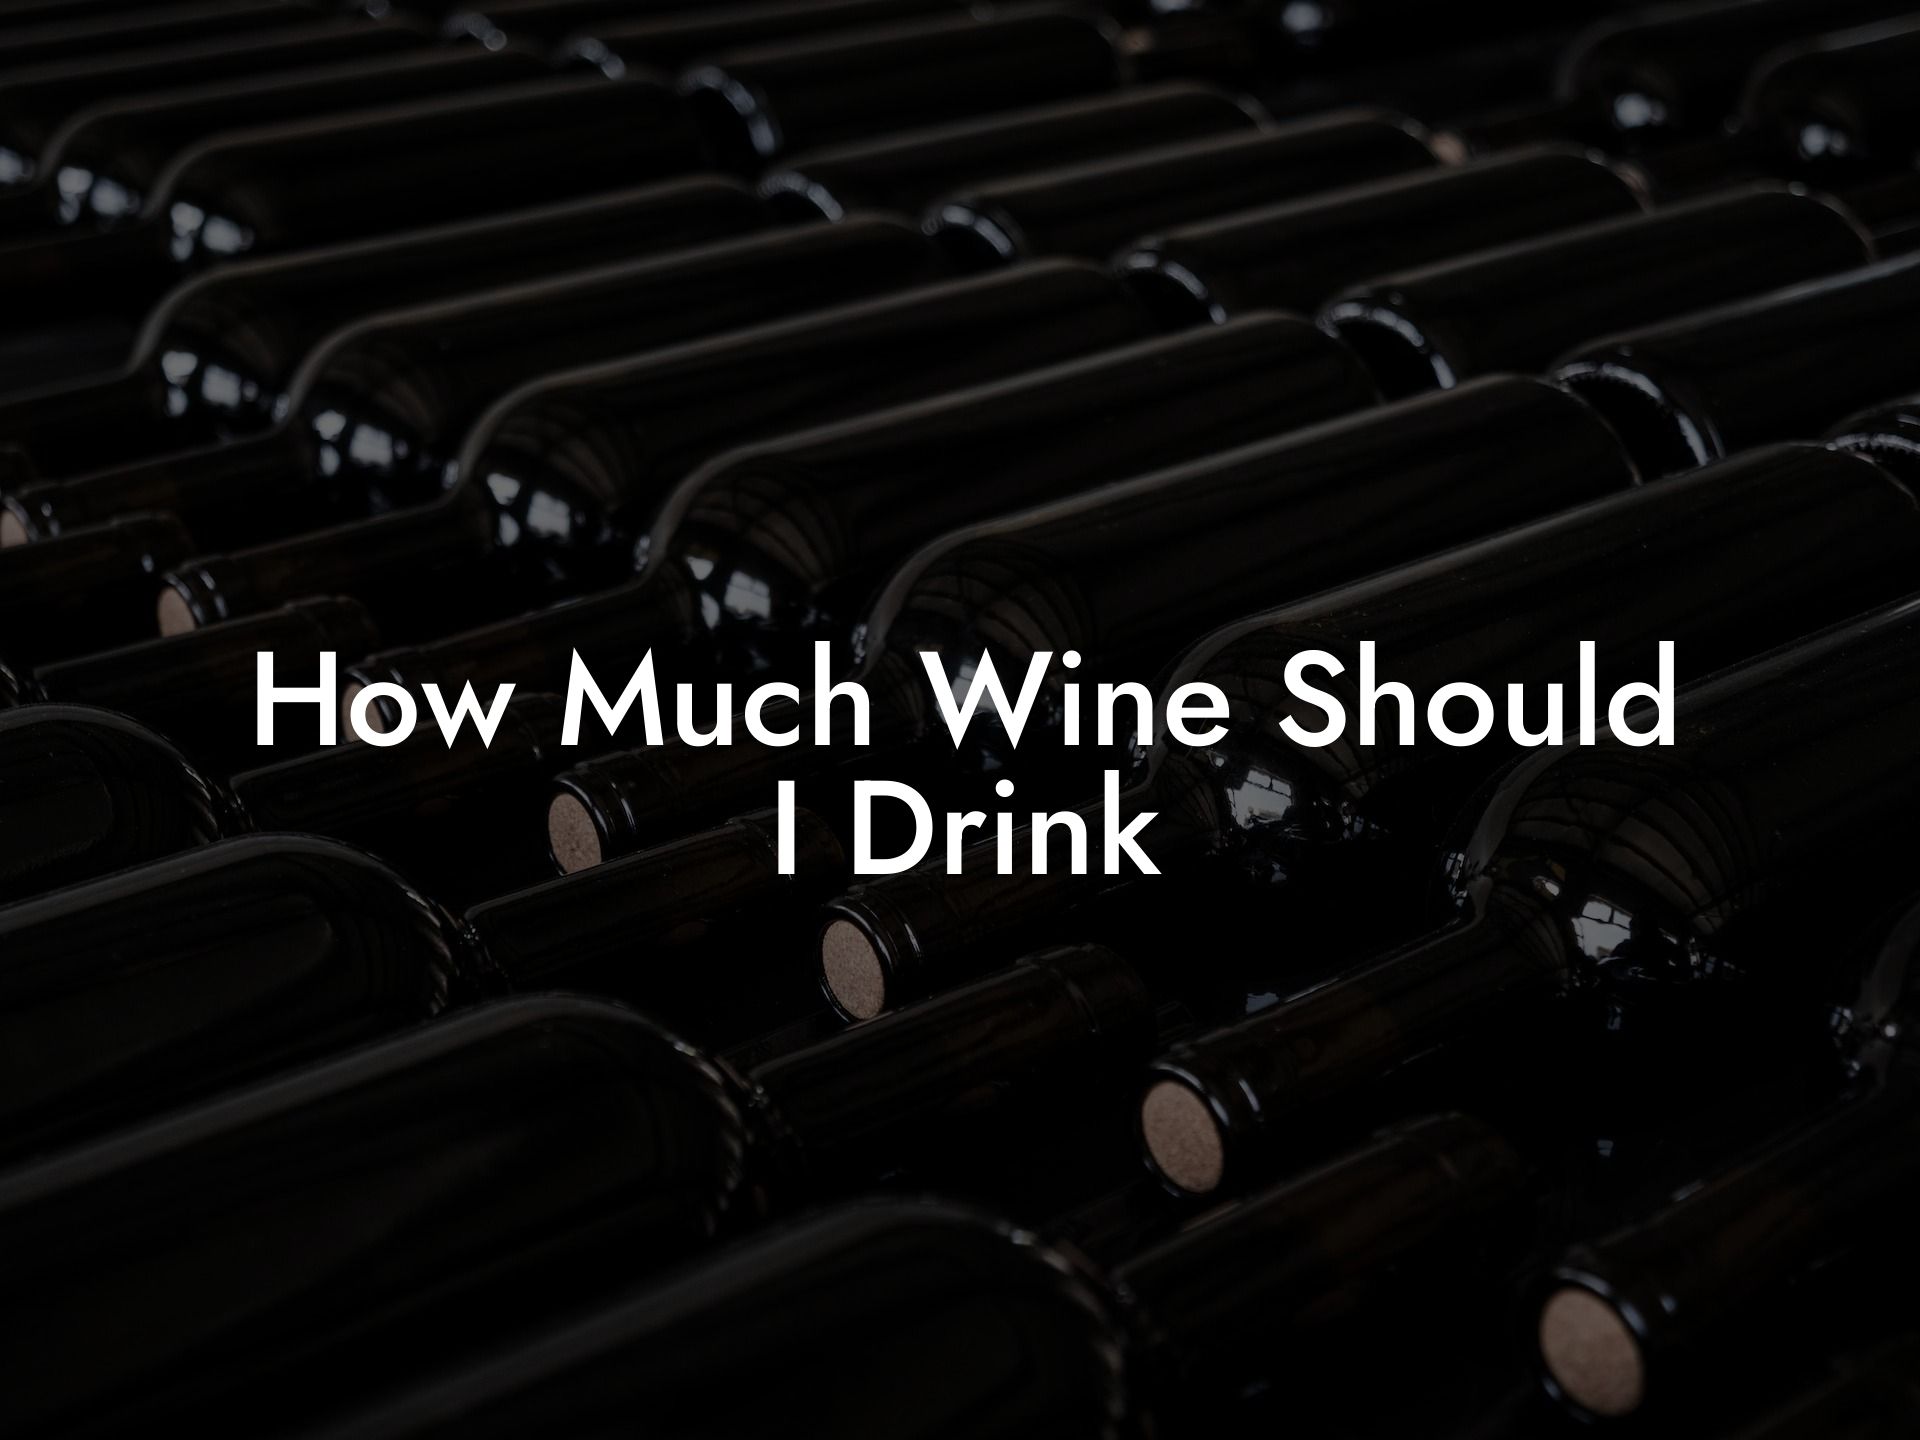 How Much Wine Should I Drink